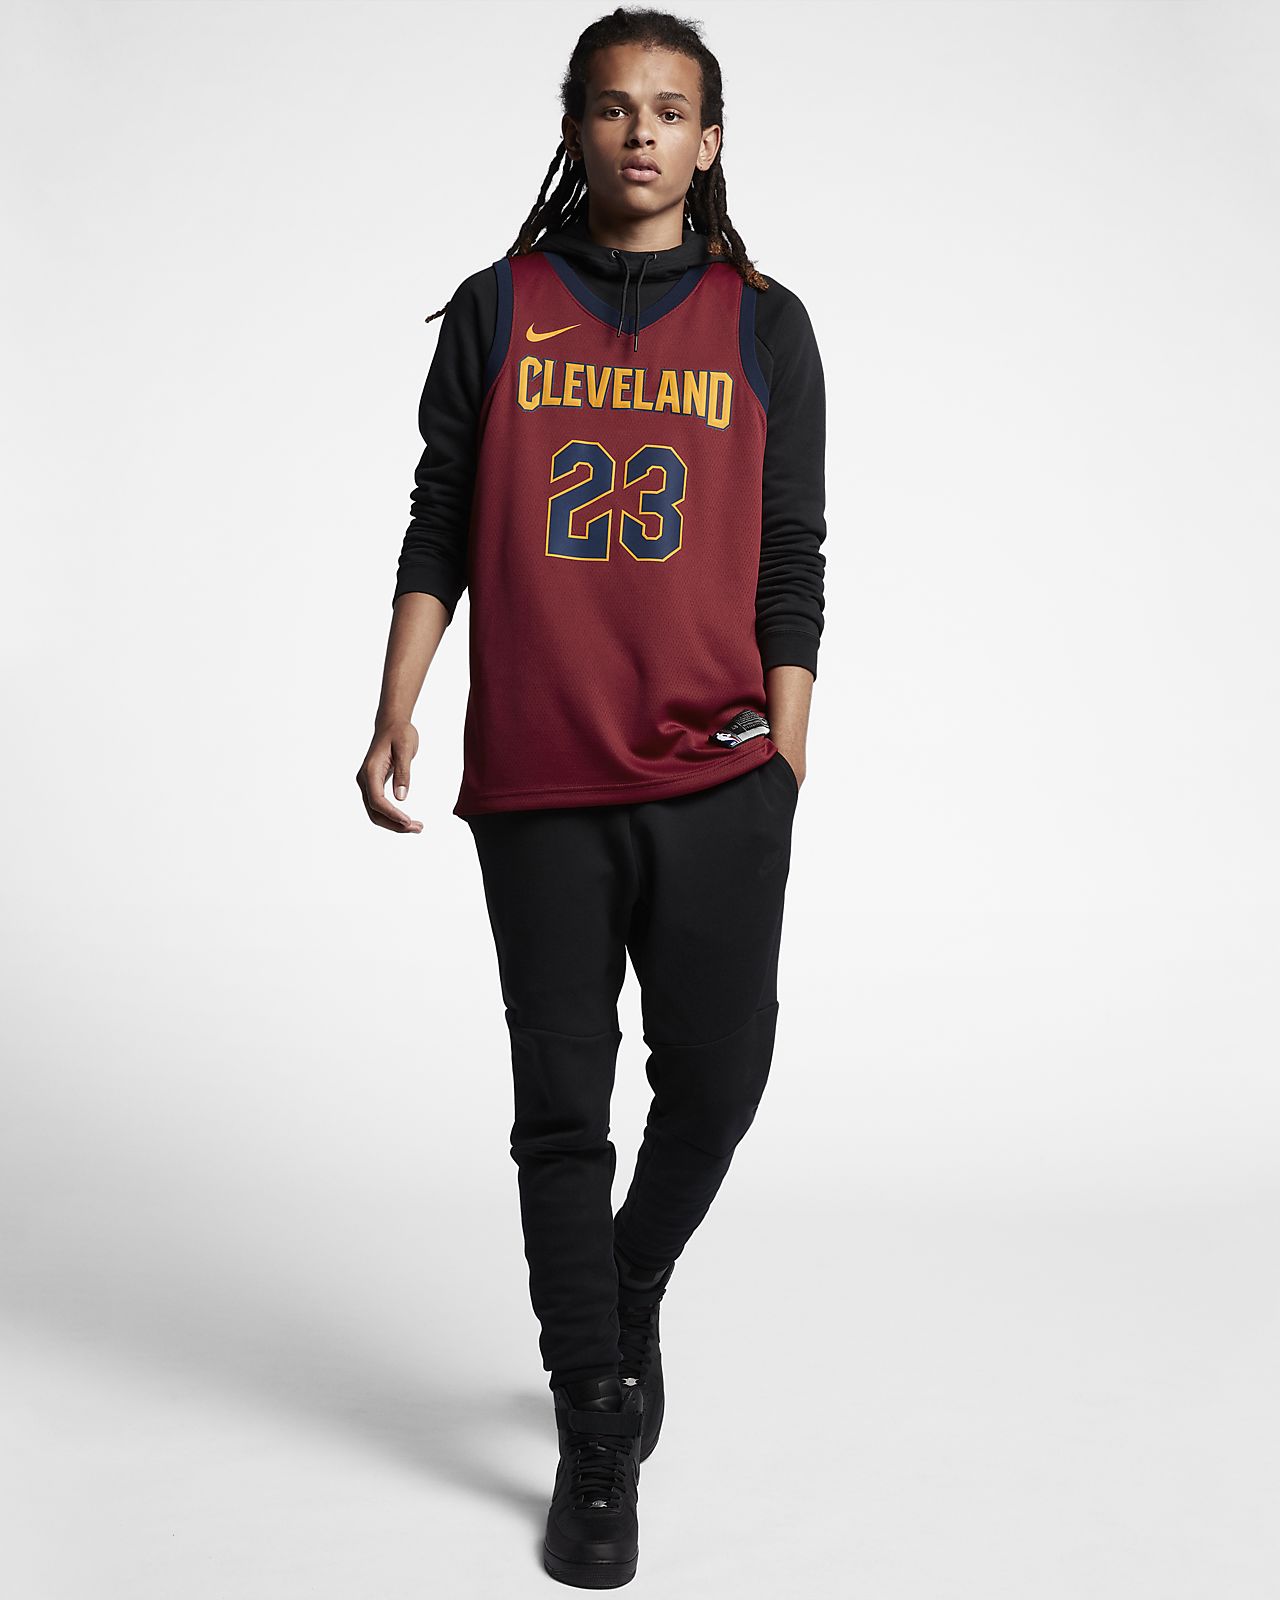 lebron james jersey outfit